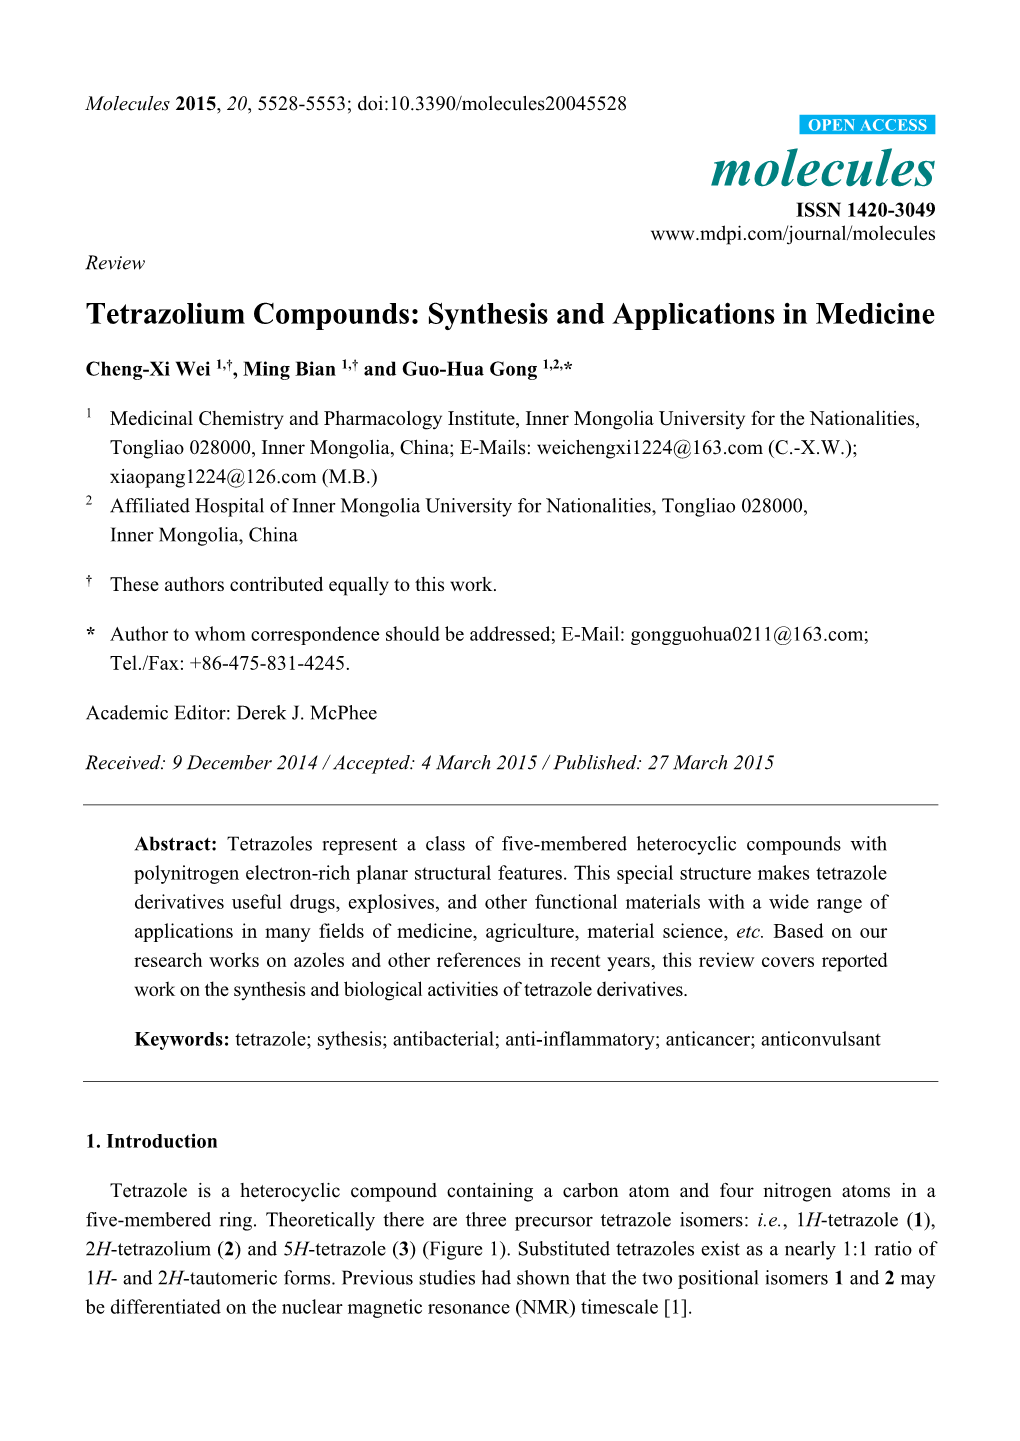 Tetrazolium Compounds: Synthesis and Applications in Medicine